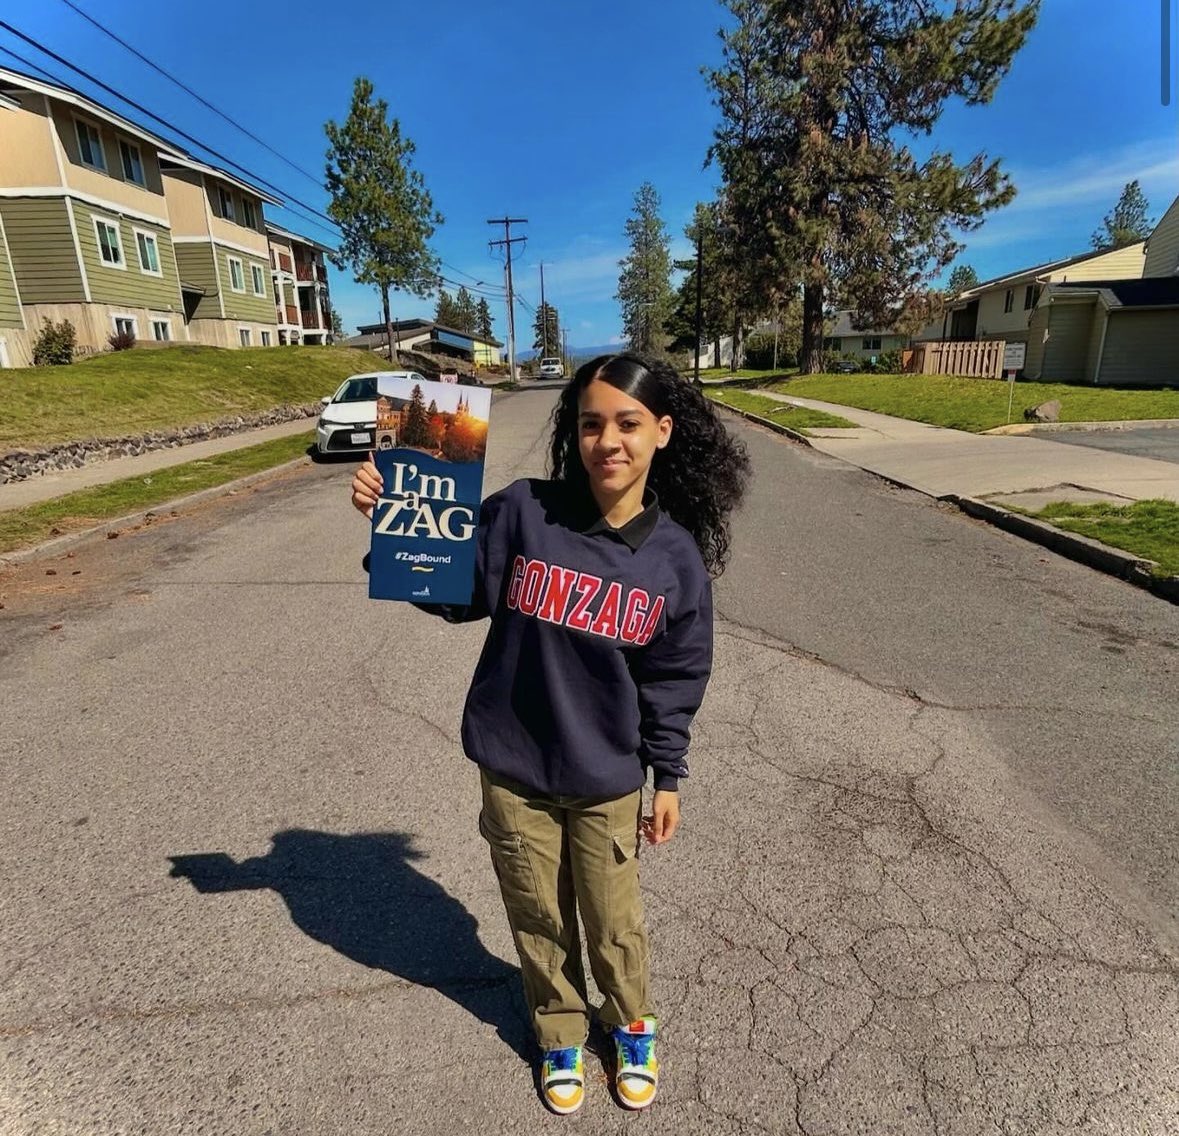 Our #ZagBound round-one sweatshirt winner! Congrats Leeyah! Continue to share your Gonzaga Acceptance using the hashtag #ZagBound and tagging us on social. YOU could be the next Zag sweatshirt winner! 🥳❤️💙